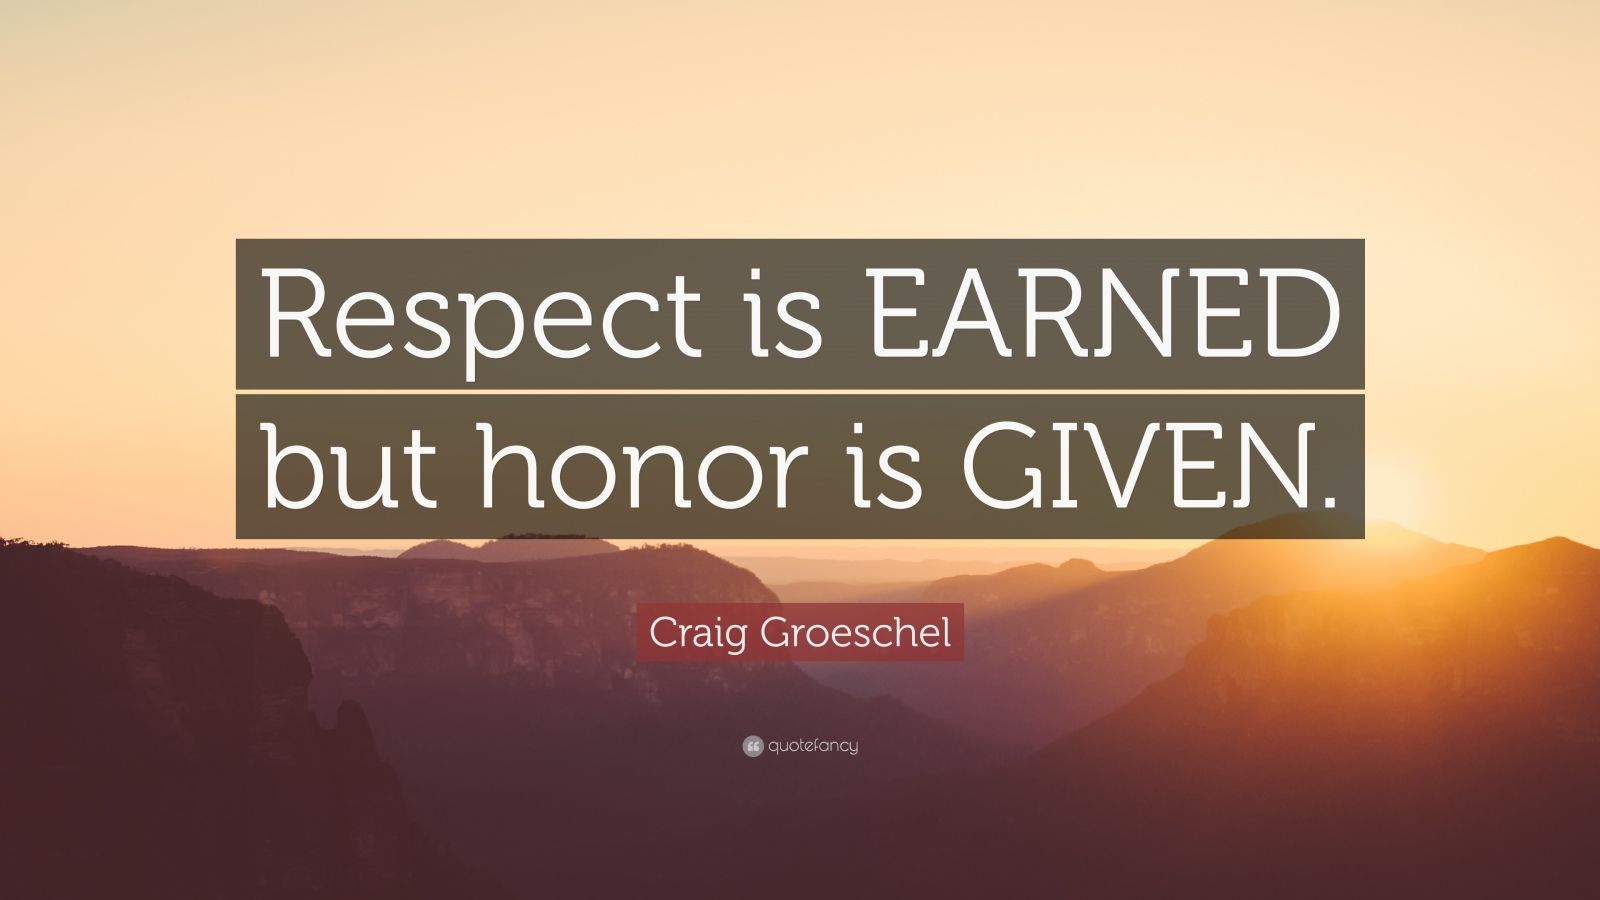 Craig Groeschel Quote “respect Is Earned But Honor Is Given” 